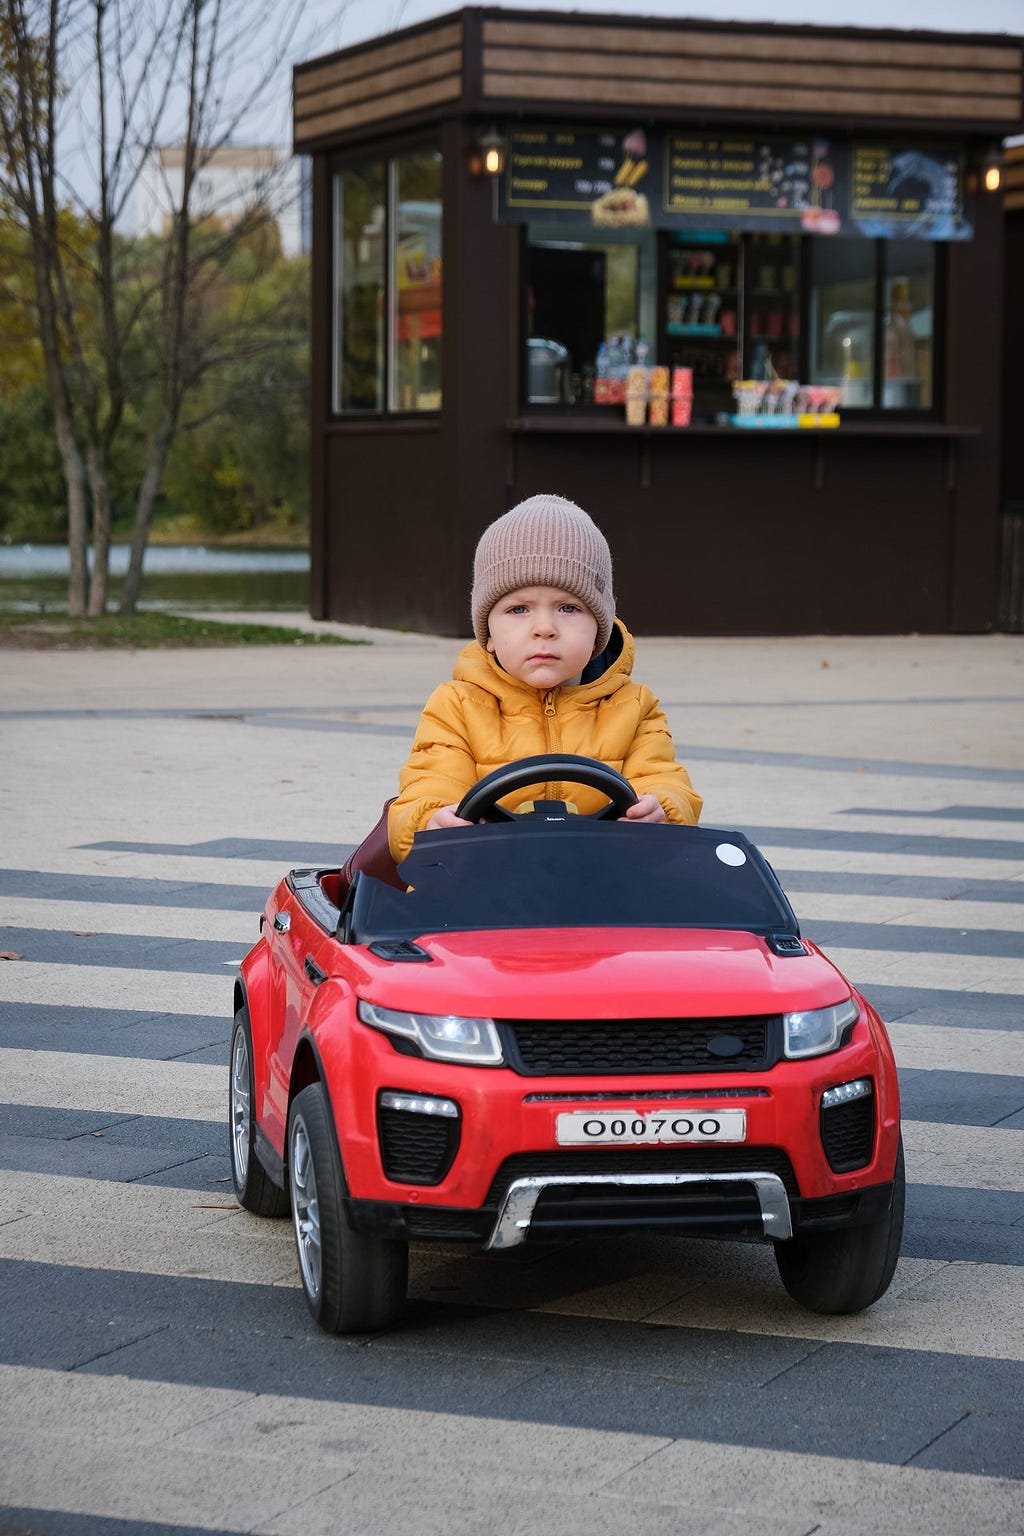 A child is driving a miniature toy car.